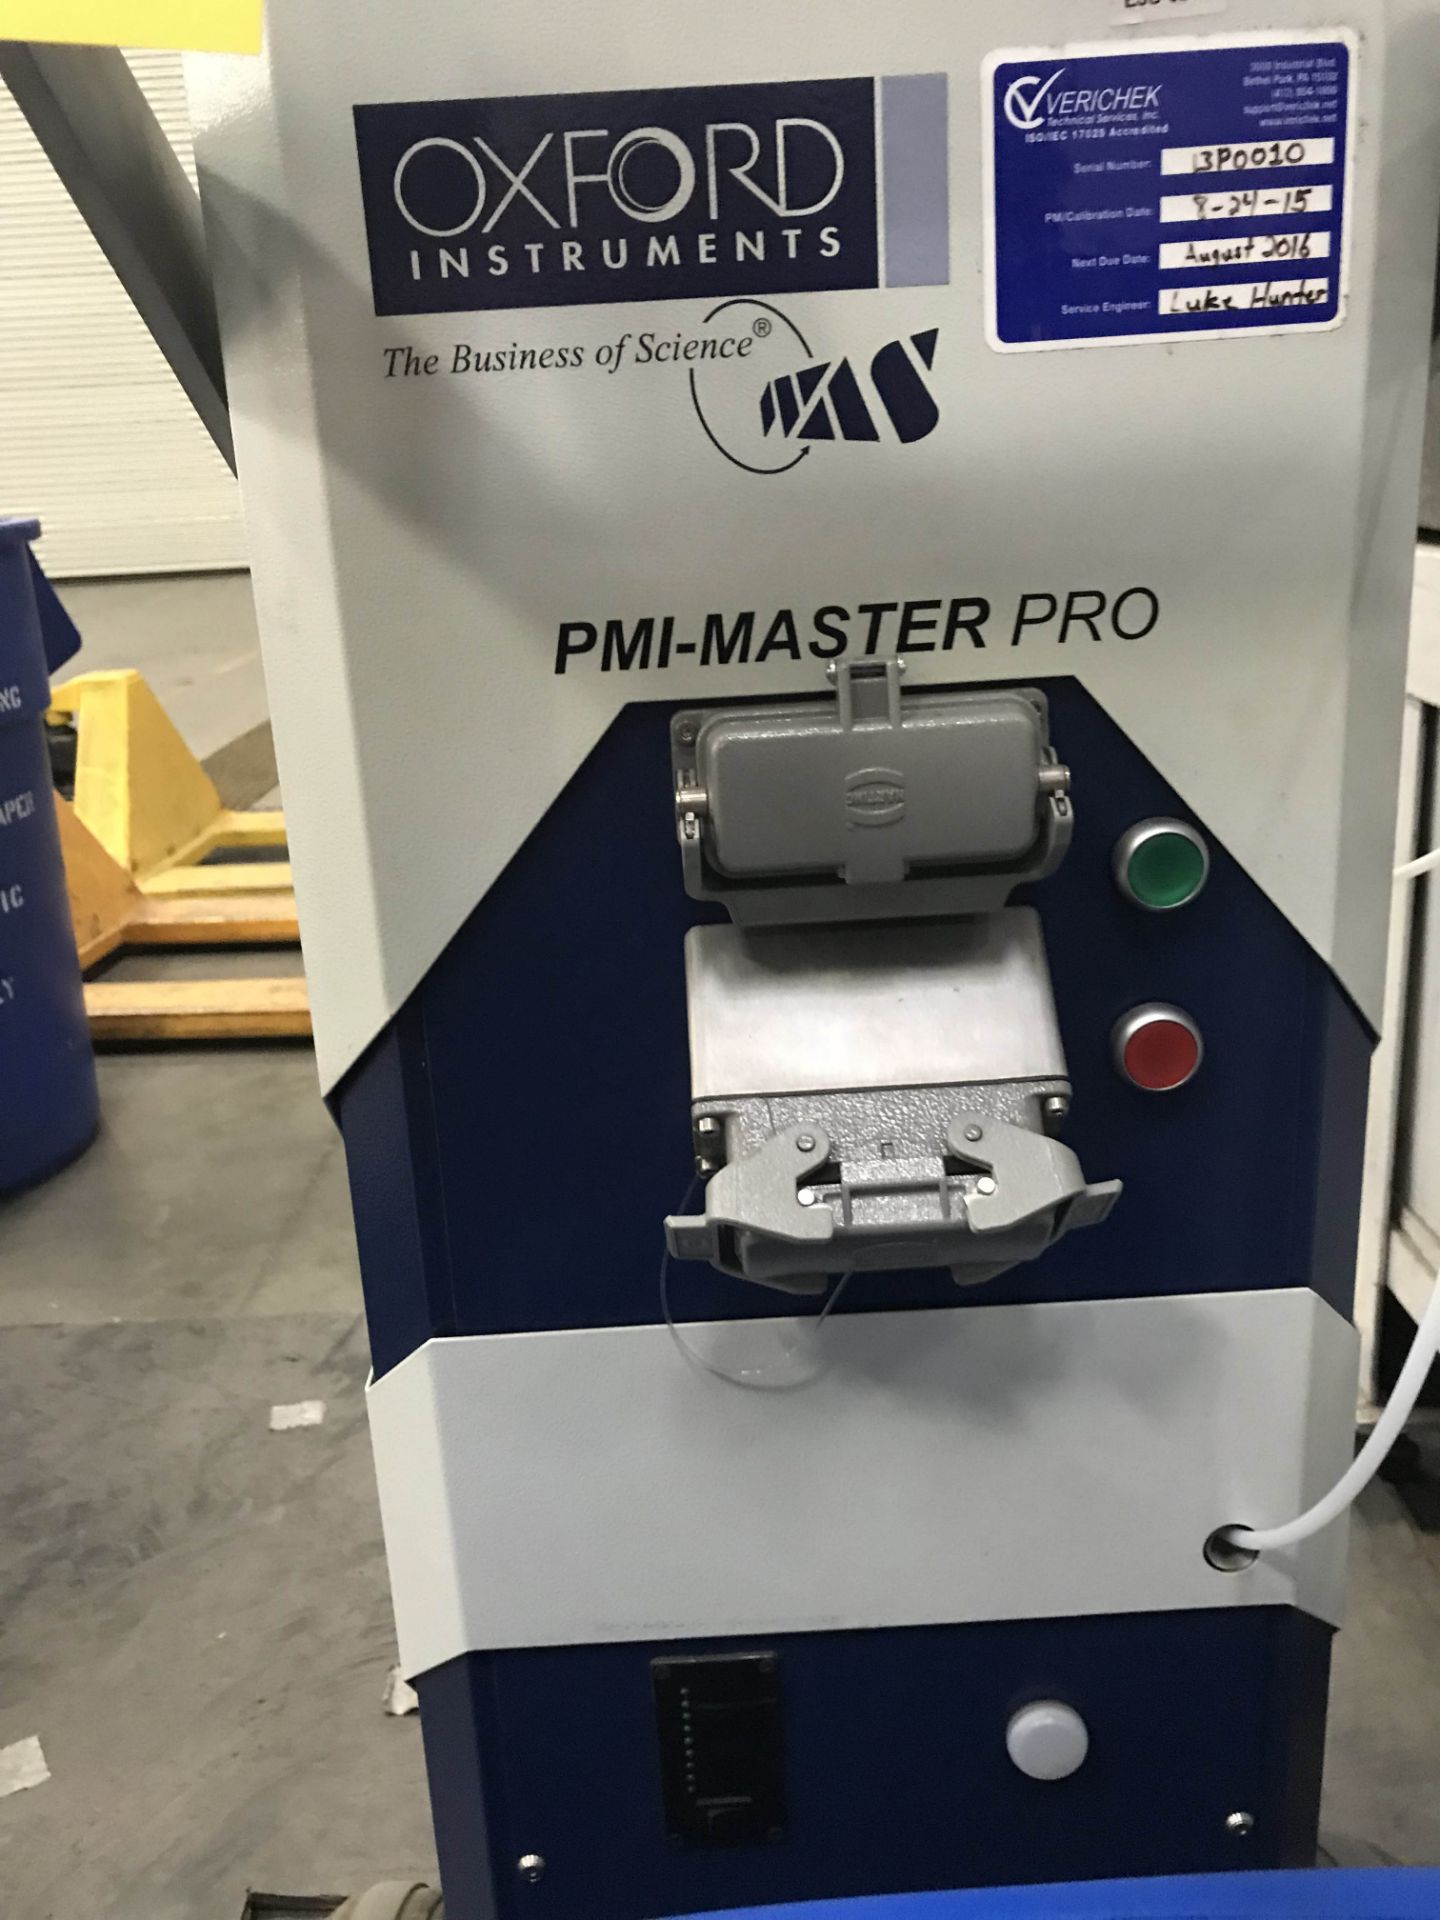 Oxford Instruments Mdl: PMI-master Pro Positive Material Identification System - Image 2 of 2